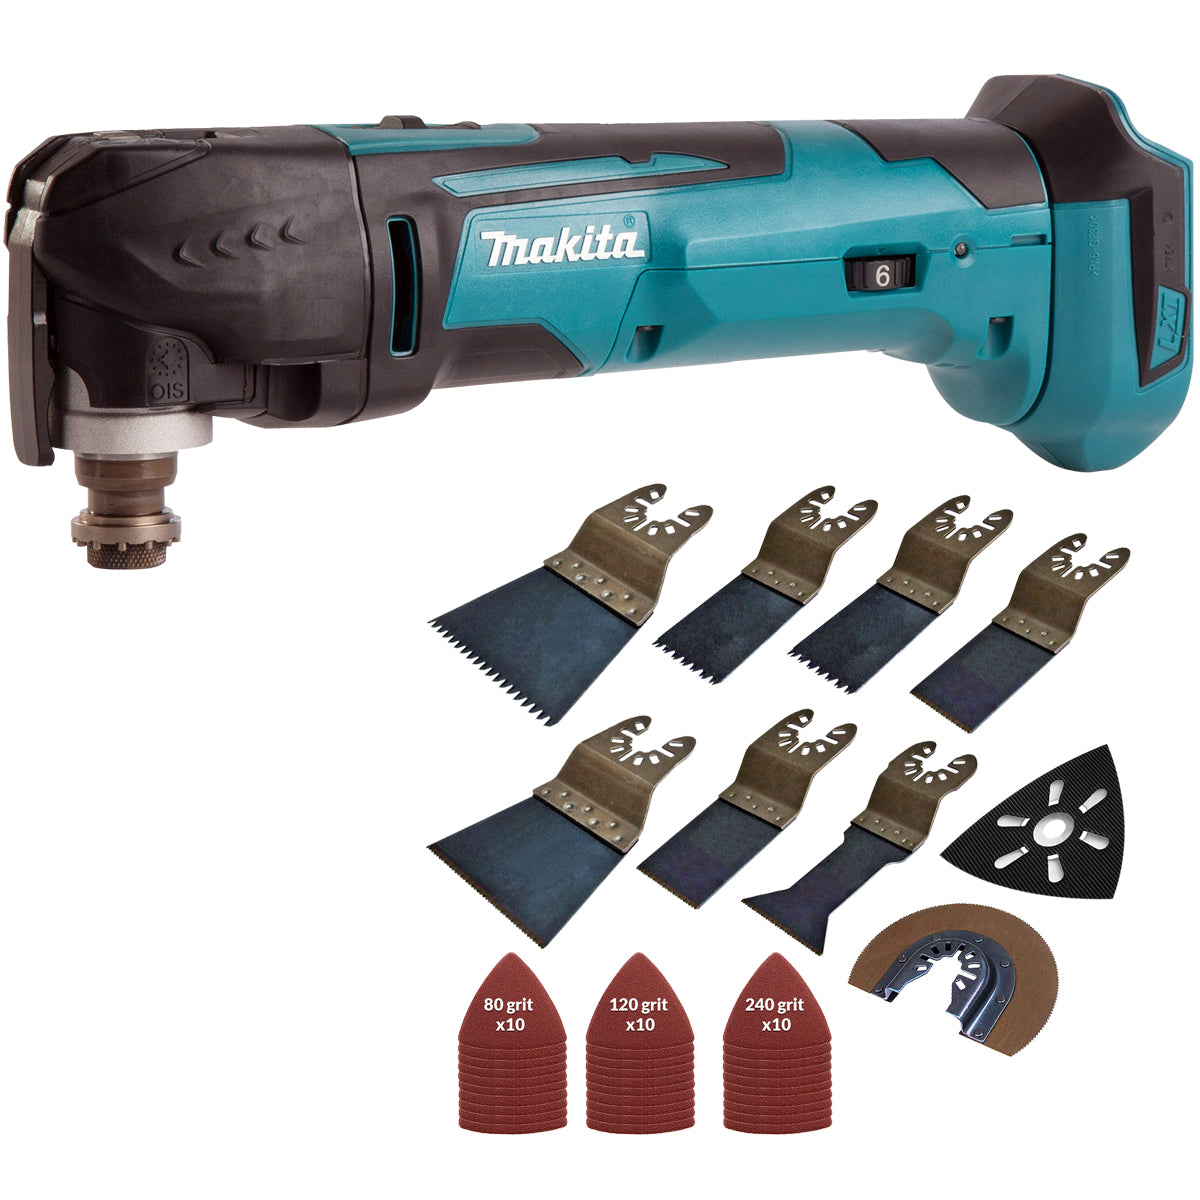 Makita DTM51Z 18V Li-ion Oscillating Multitool Cutter with 39 Piece Accessories Set